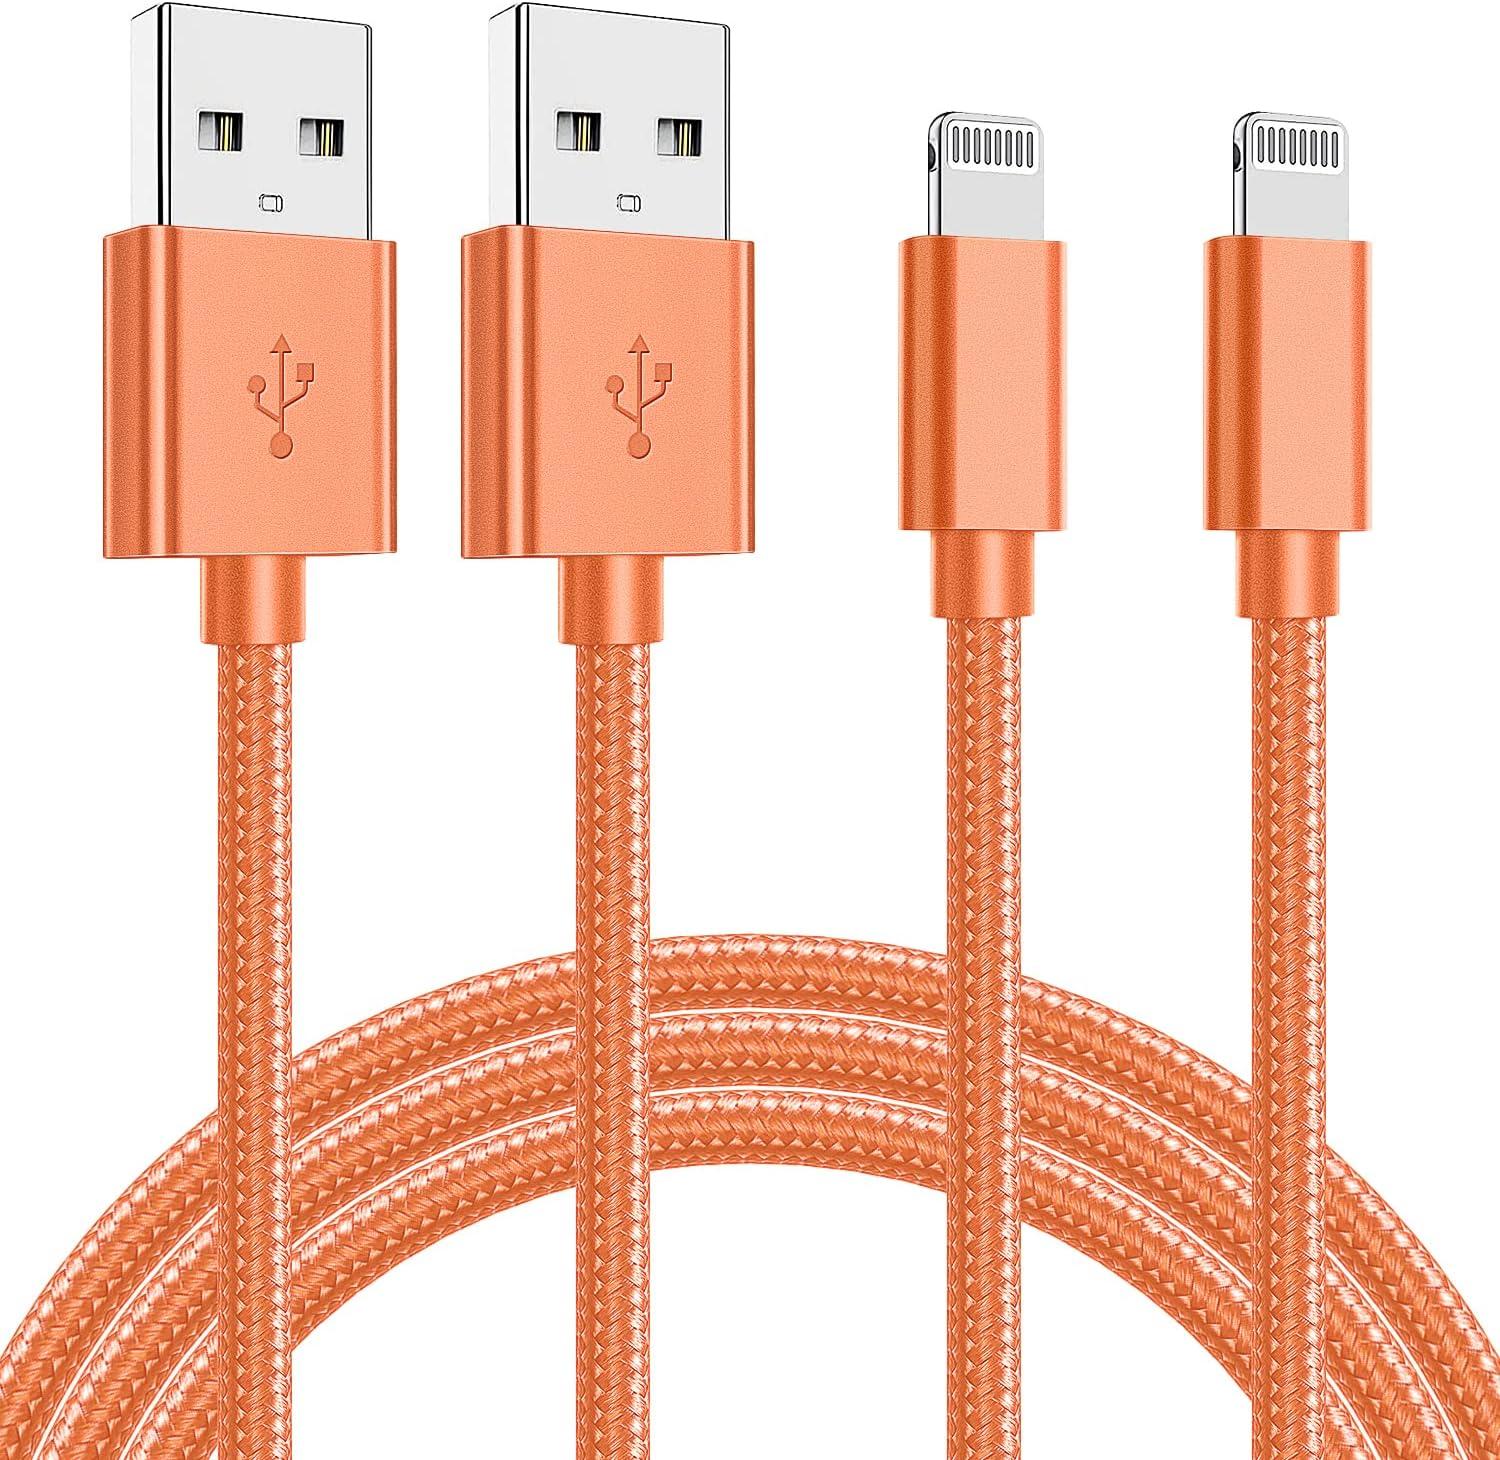 Apple iPhone MFi Certified Nylon Braided Lightning Cables 2 Pack for $3.80